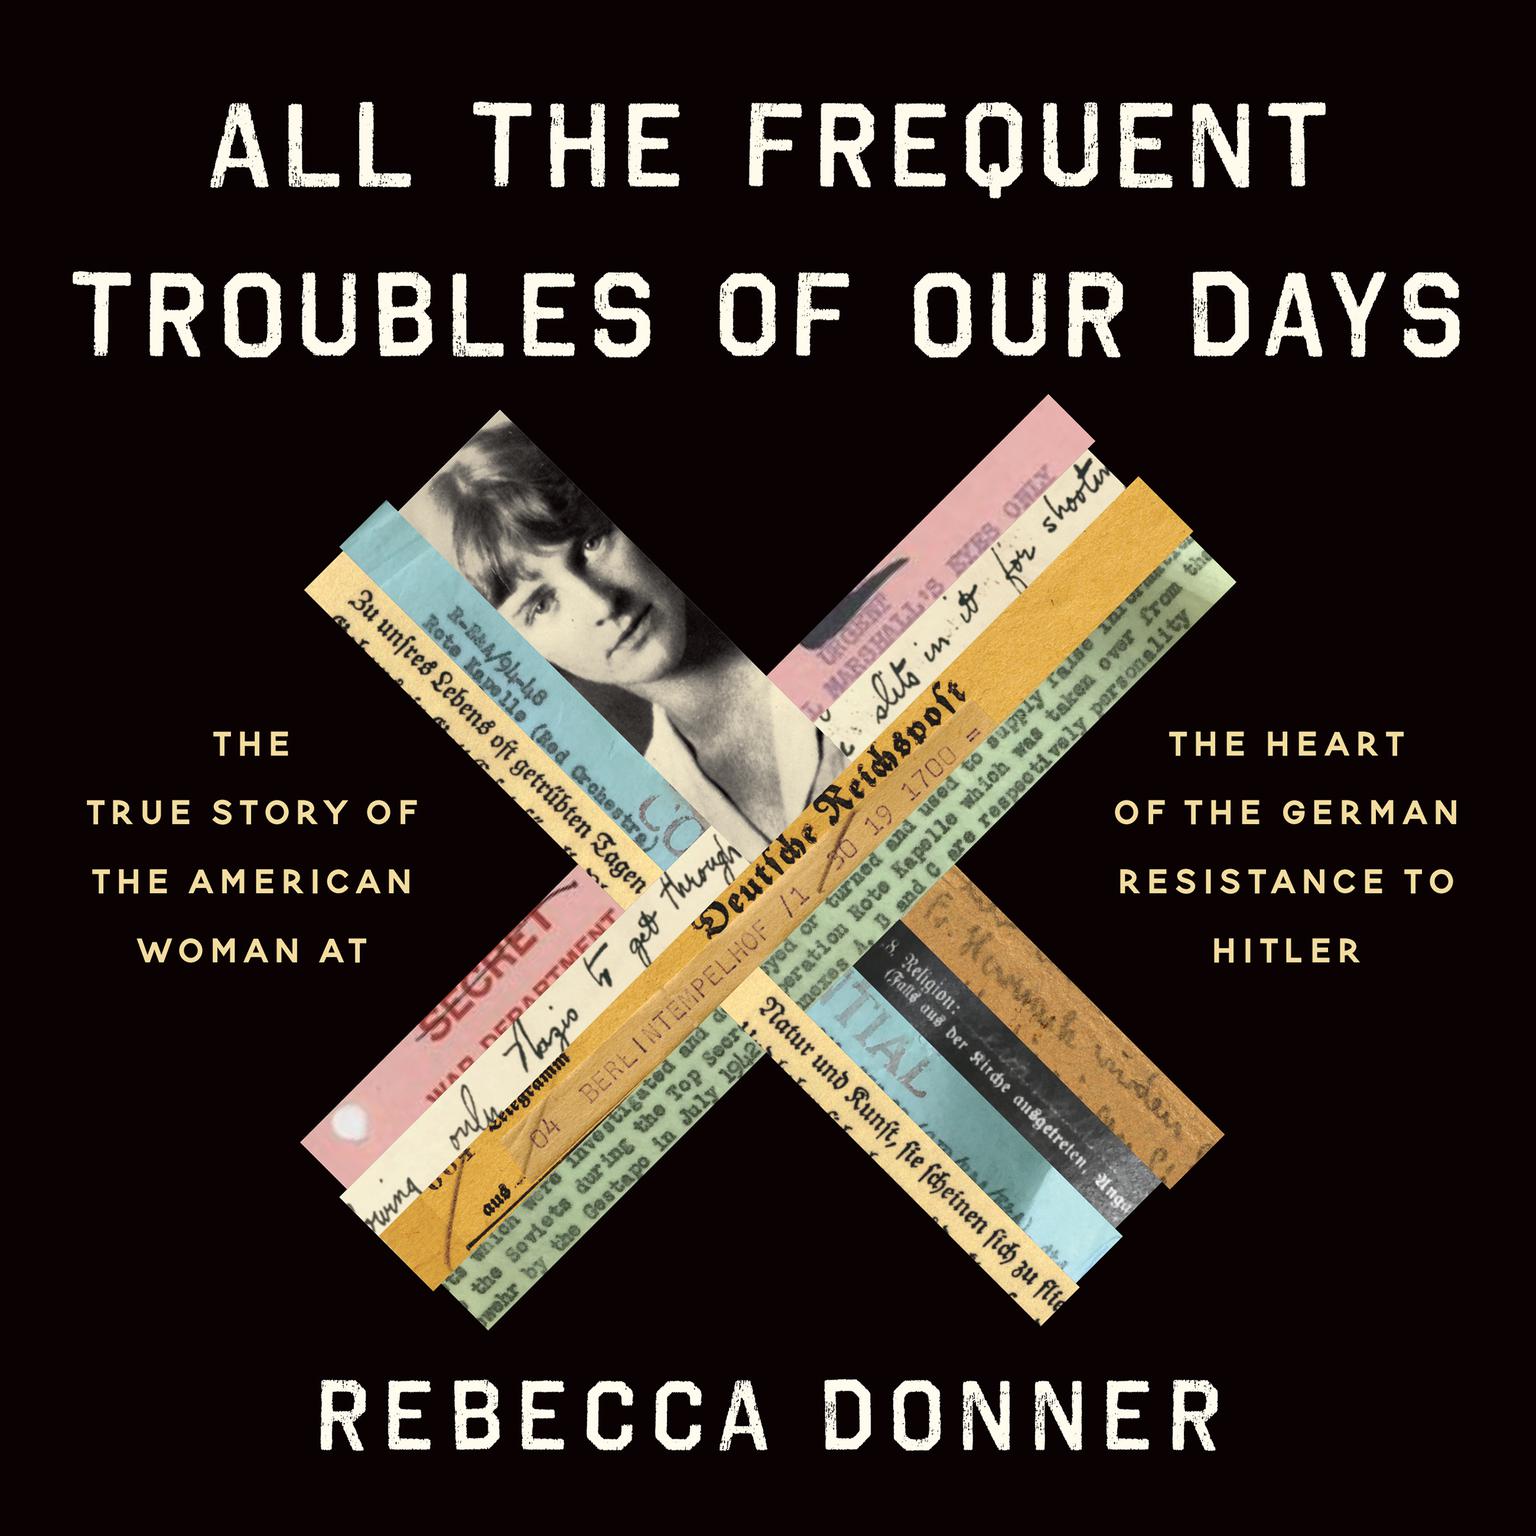 All the Frequent Troubles of Our Days: The True Story of the American Woman at the Heart of the German Resistance to Hitler Audiobook, by Rebecca Donner